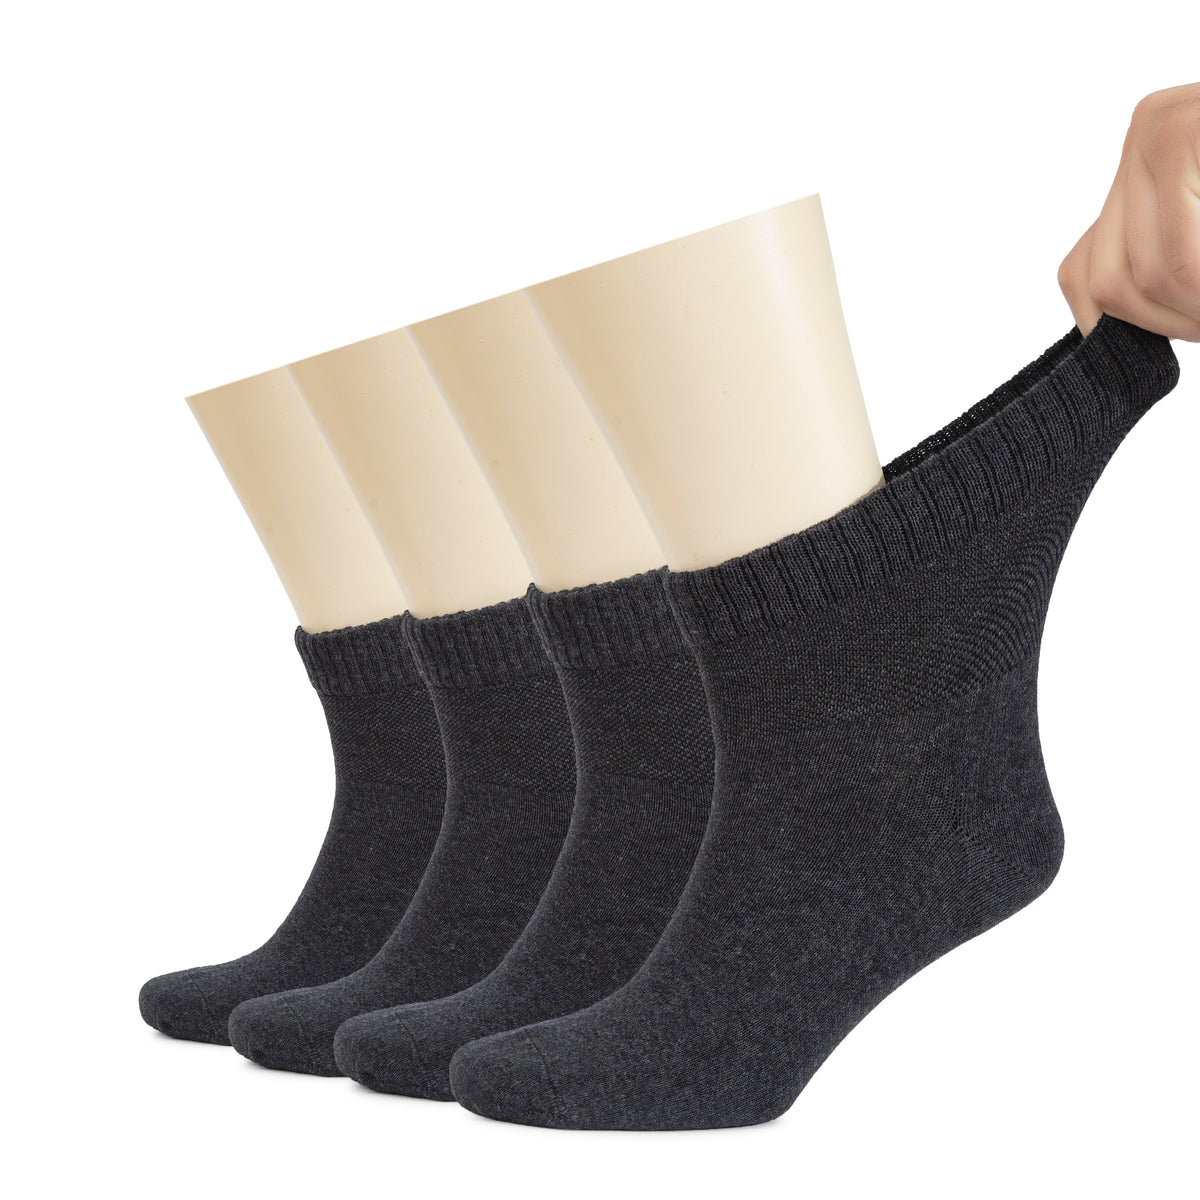 The image depicts a person holding two pairs of Men's Diabetic Ankle Socks, which are specially designed to provide support and comfort for those with diabetes or circulation issues.